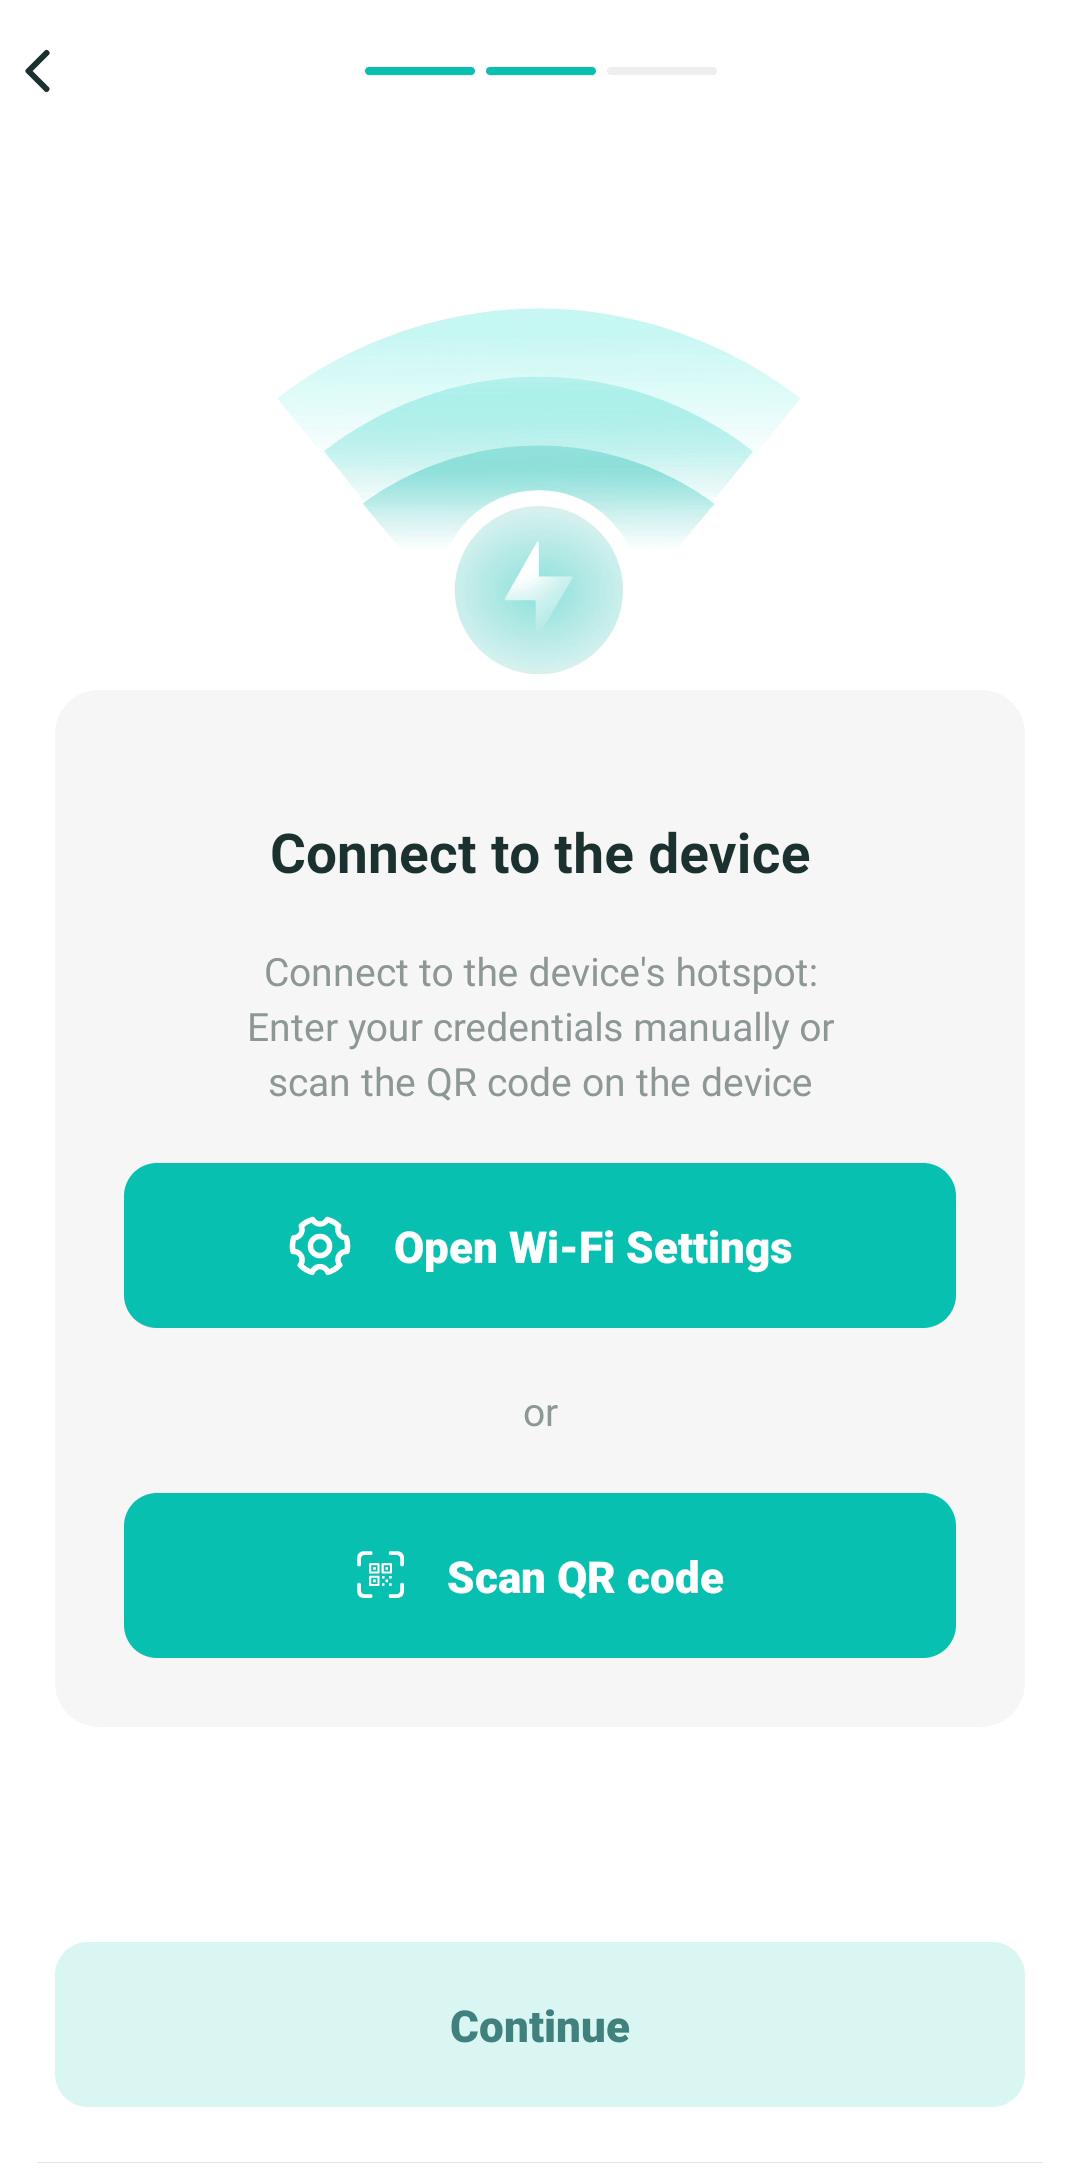 "Connect to the device" screen